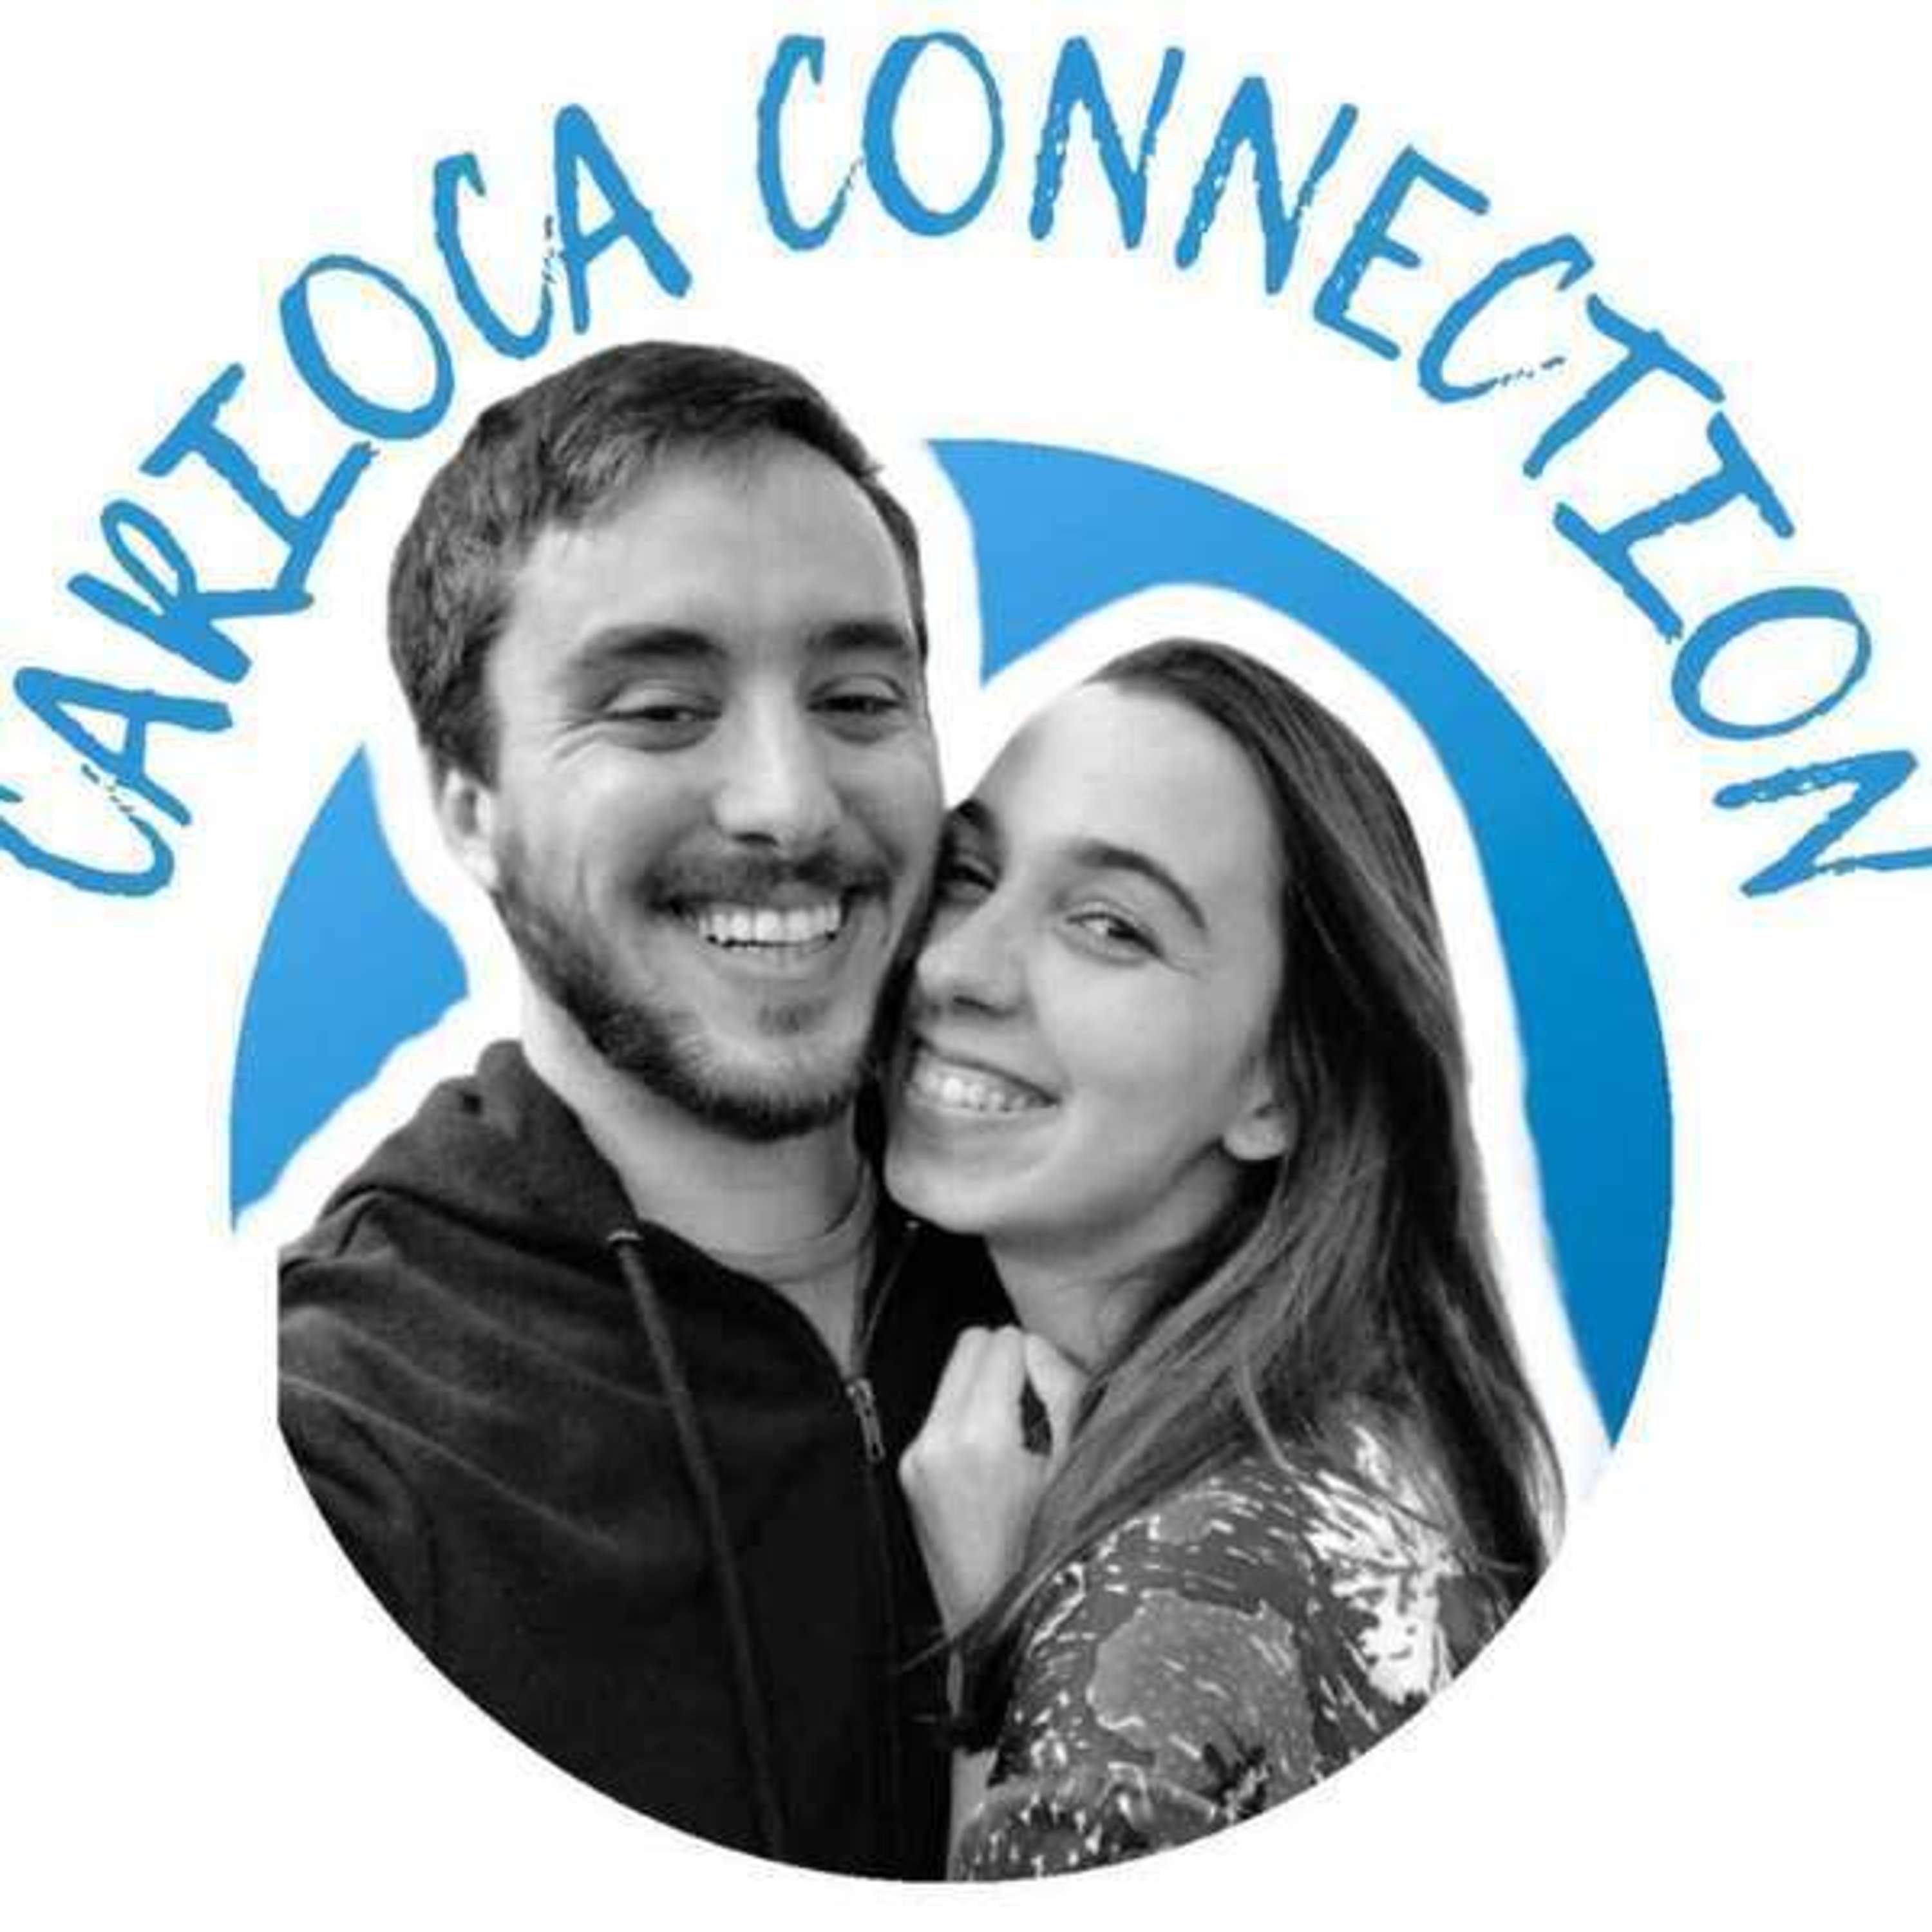 The Best Of: Welcome To Carioca Connection